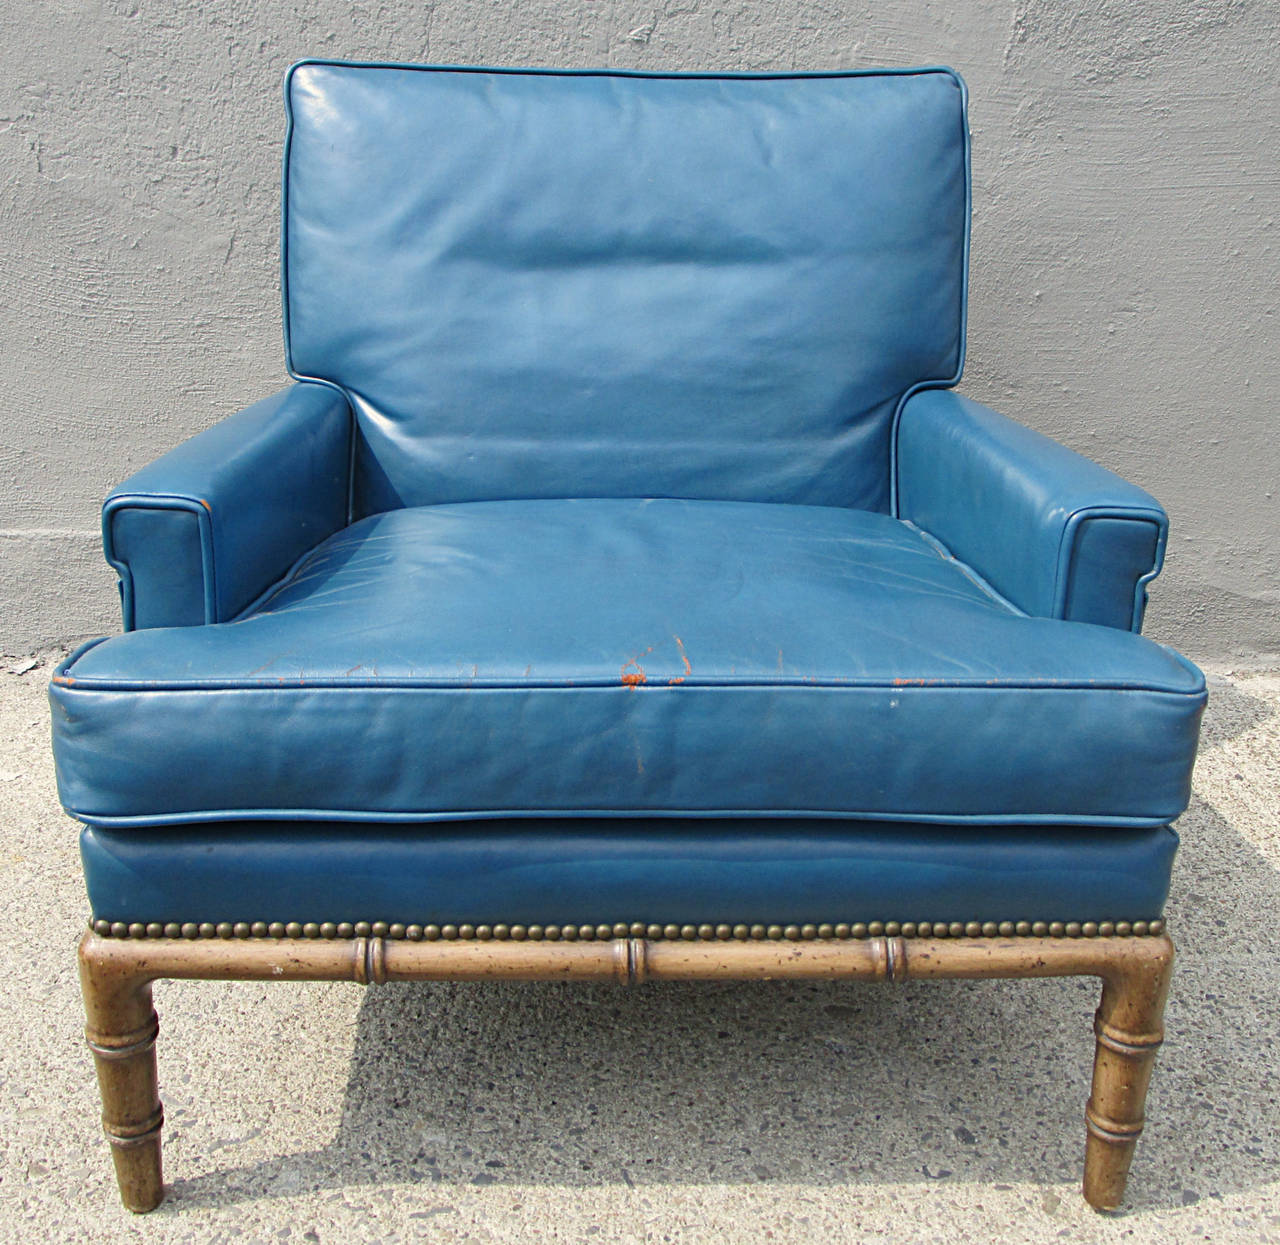 Club chair by Erwin-Lambeth for John Stuart. Worn appropriately, this blue leather chair sit extremely comfortably. Faux bamboo legs are reminiscent of Robsjohn-Gibbings chairs of the same period. Wear to finish on feet.